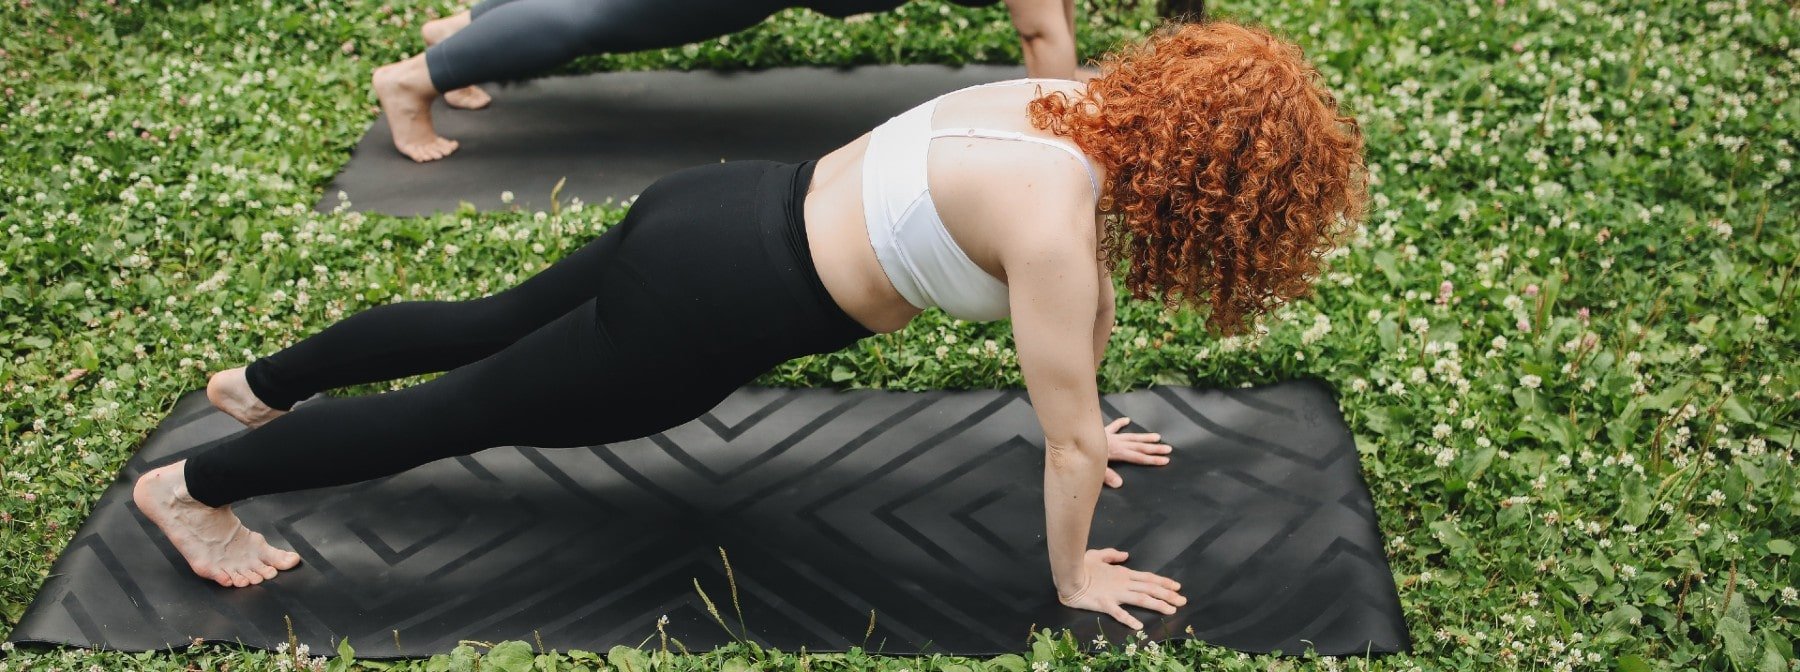 32 No-Equipment Ab Exercises You Can Do on a Mat